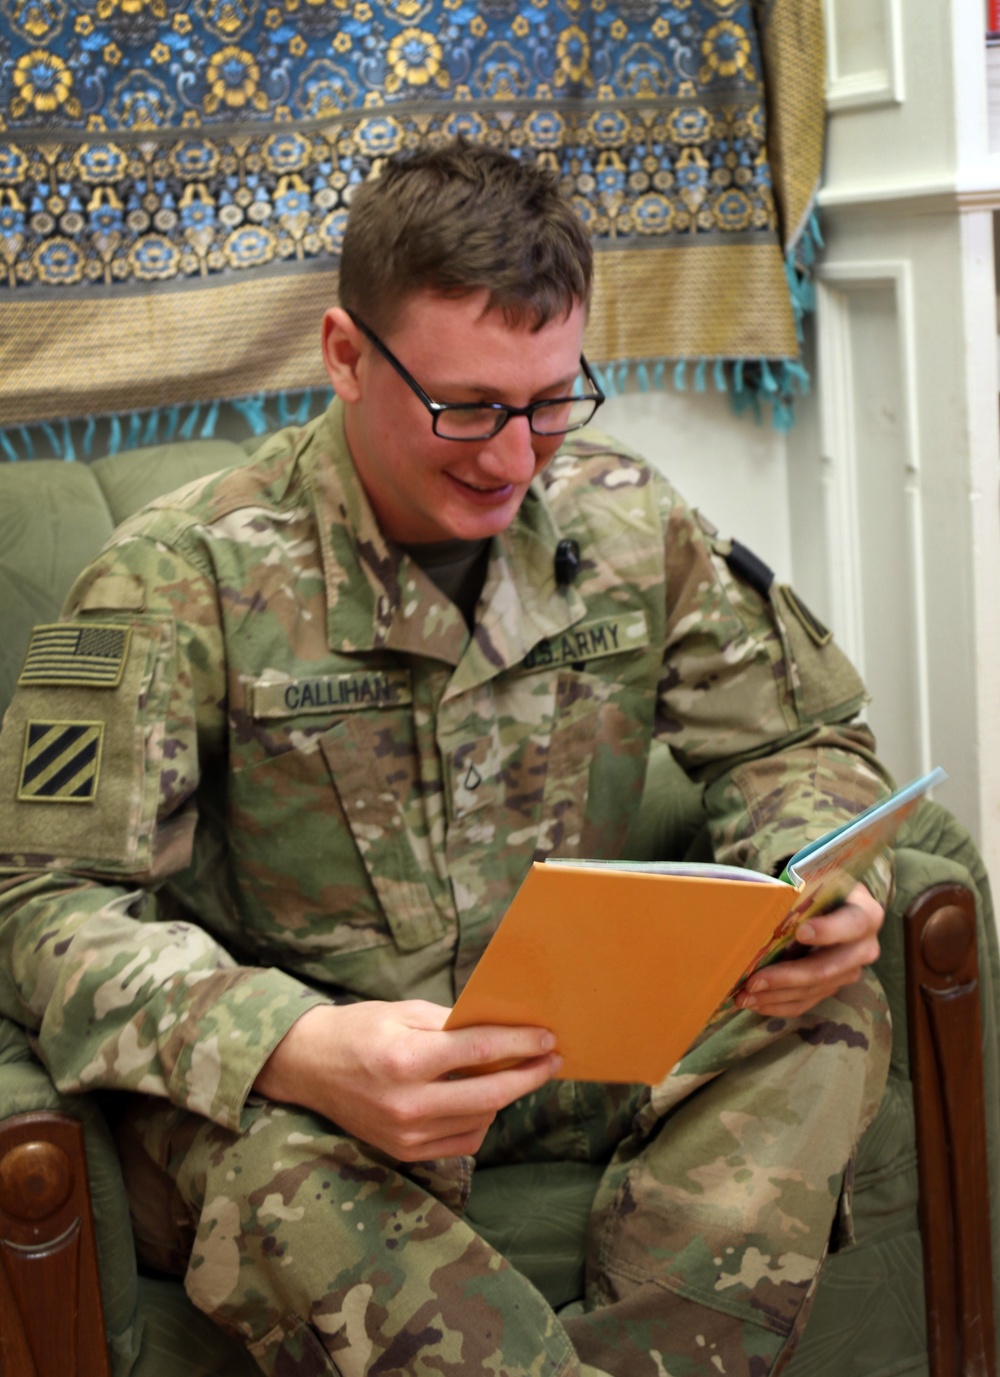 Battlefields to Bedtime Soldiers Send Home Stories for Loved Ones